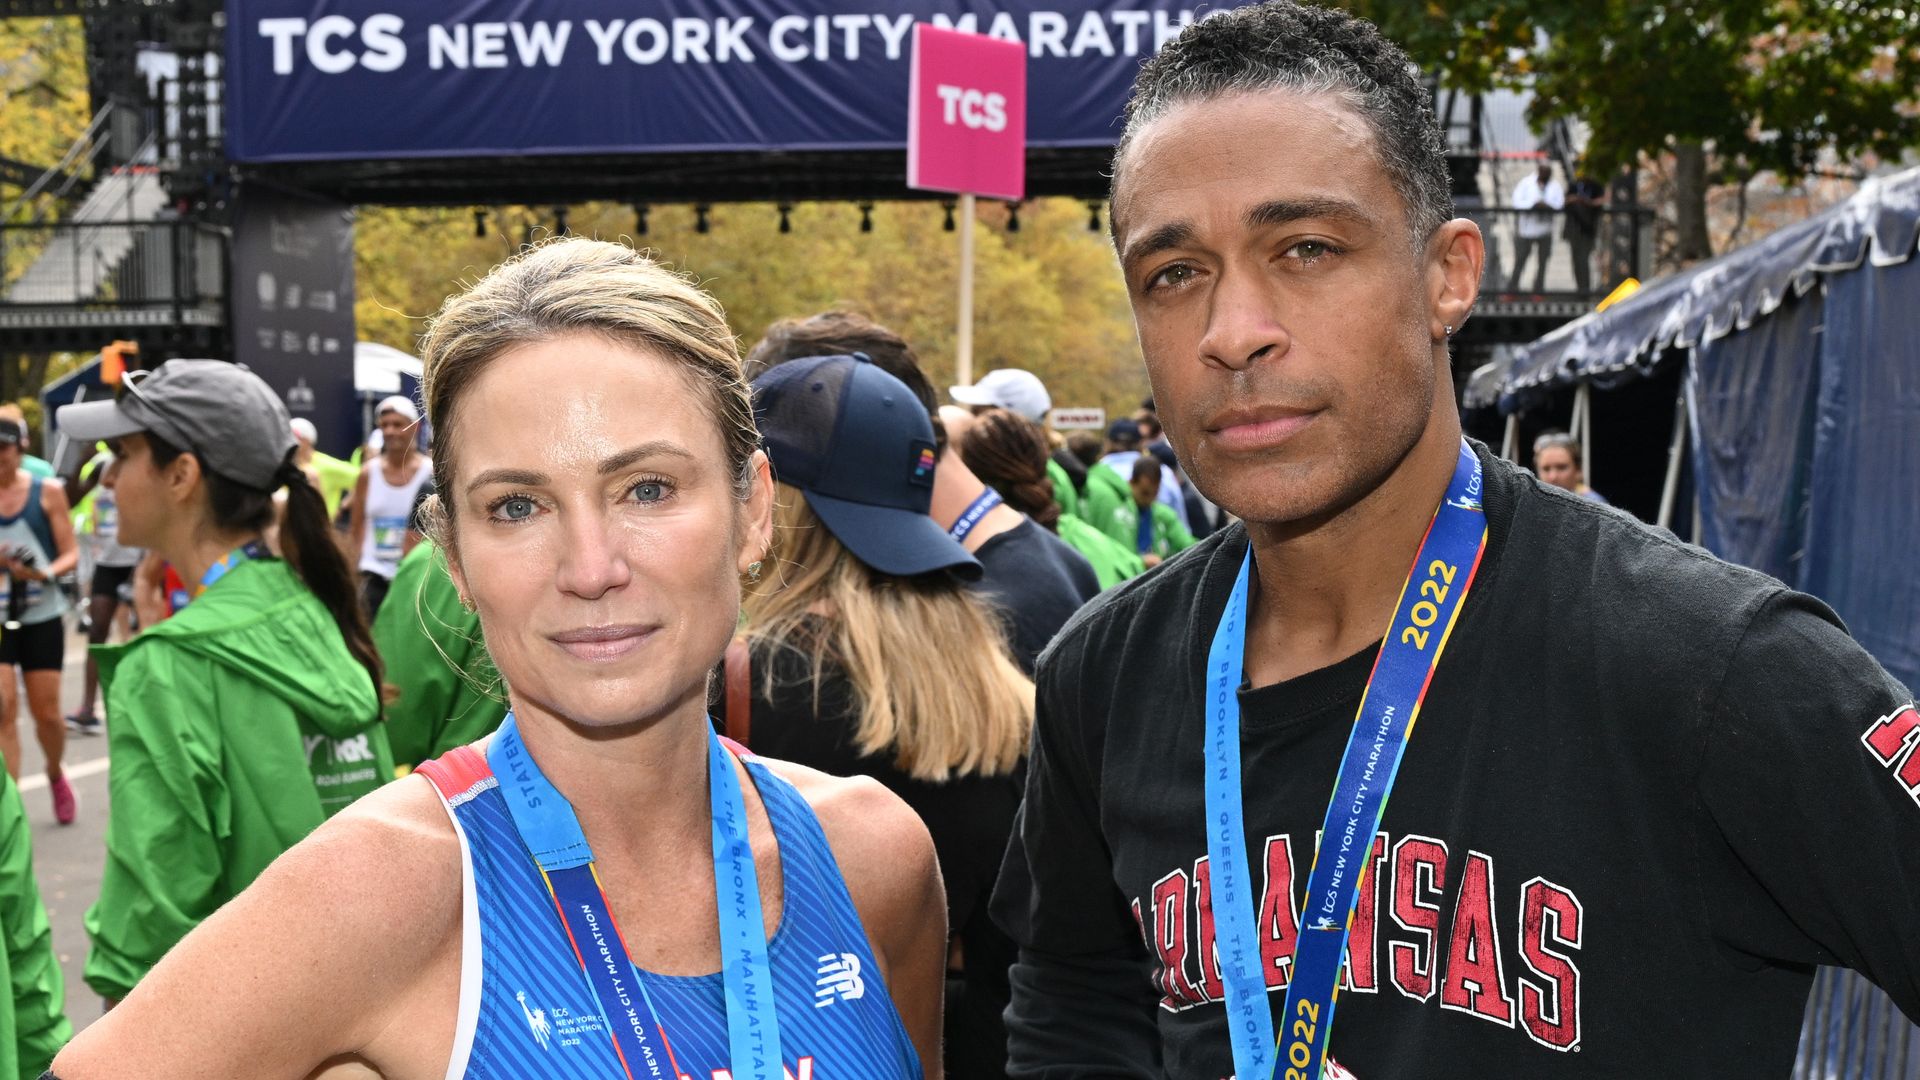 Amy Robach and T.J. Holmes warned not to record latest episode of podcast - 'It's been a hell of a few days'